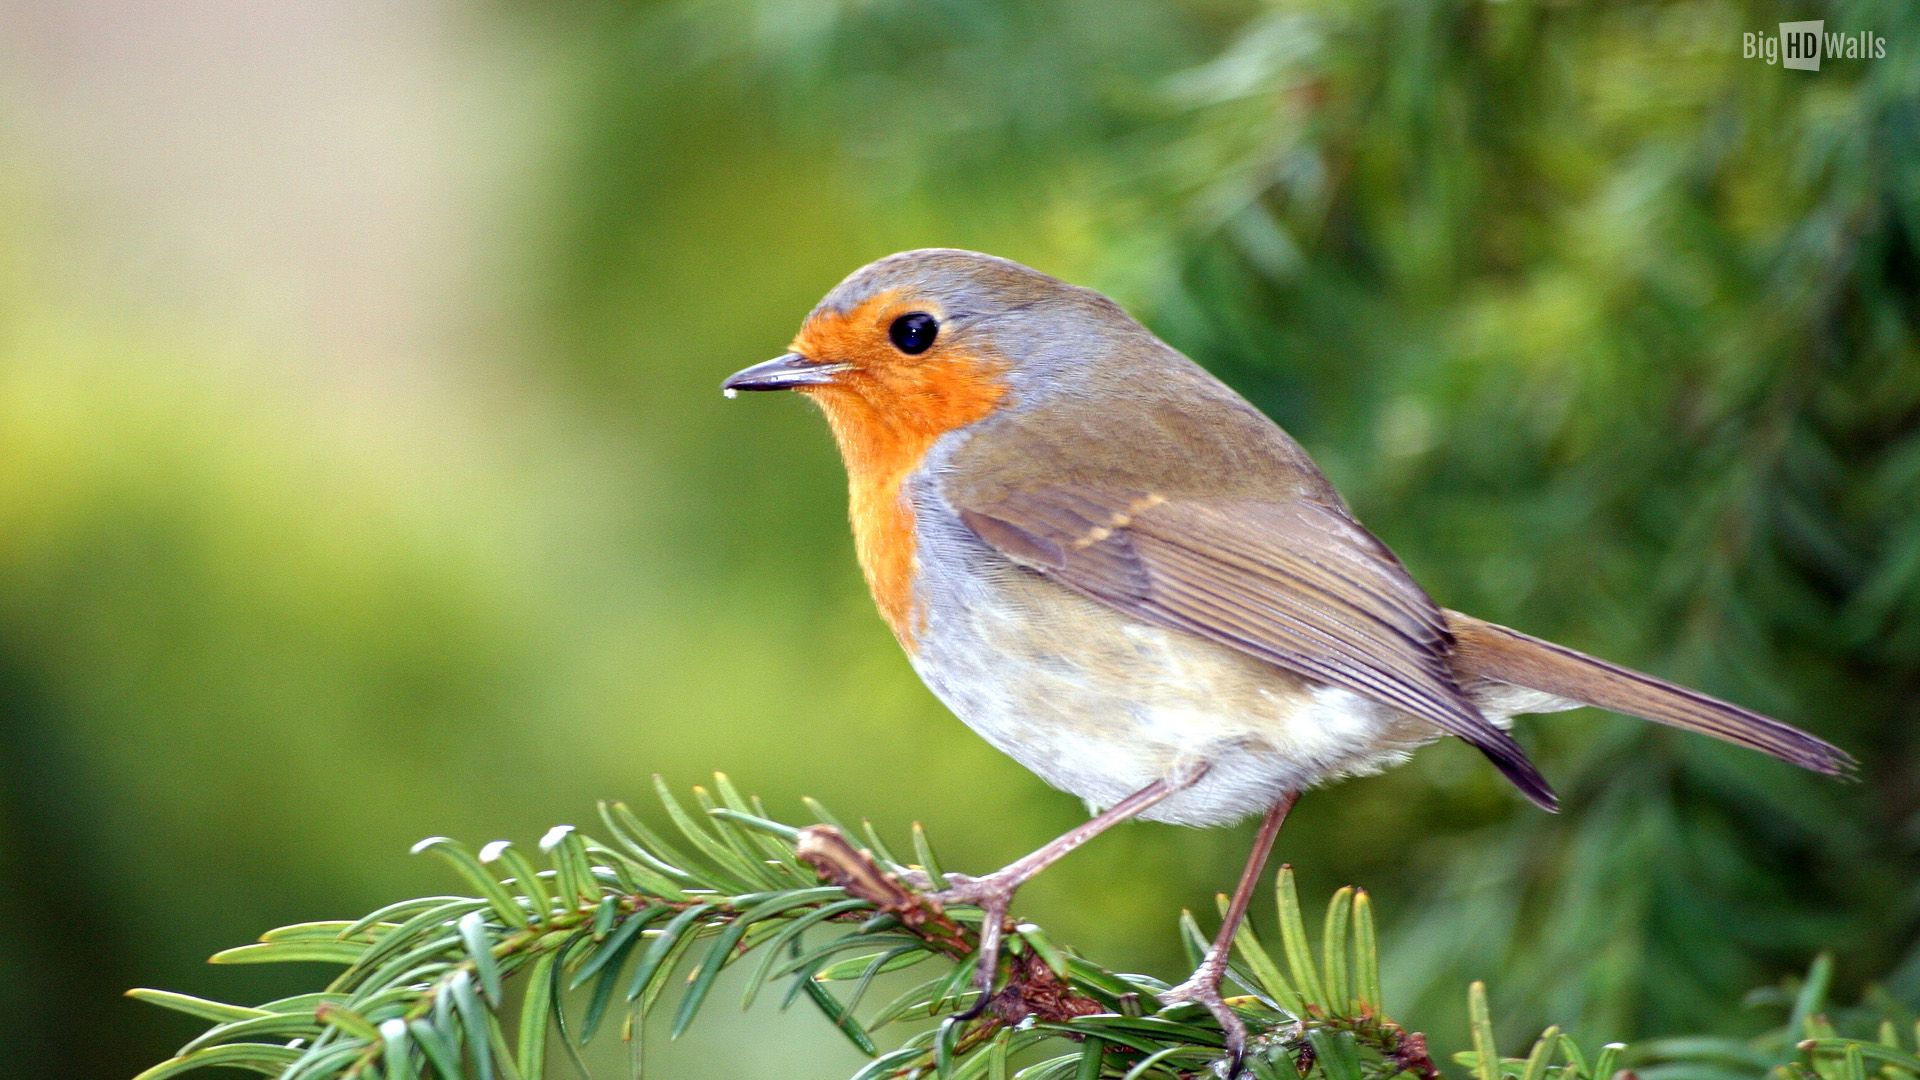 Download A beautiful small bird standing peacefully on a branch  Wallpapers com